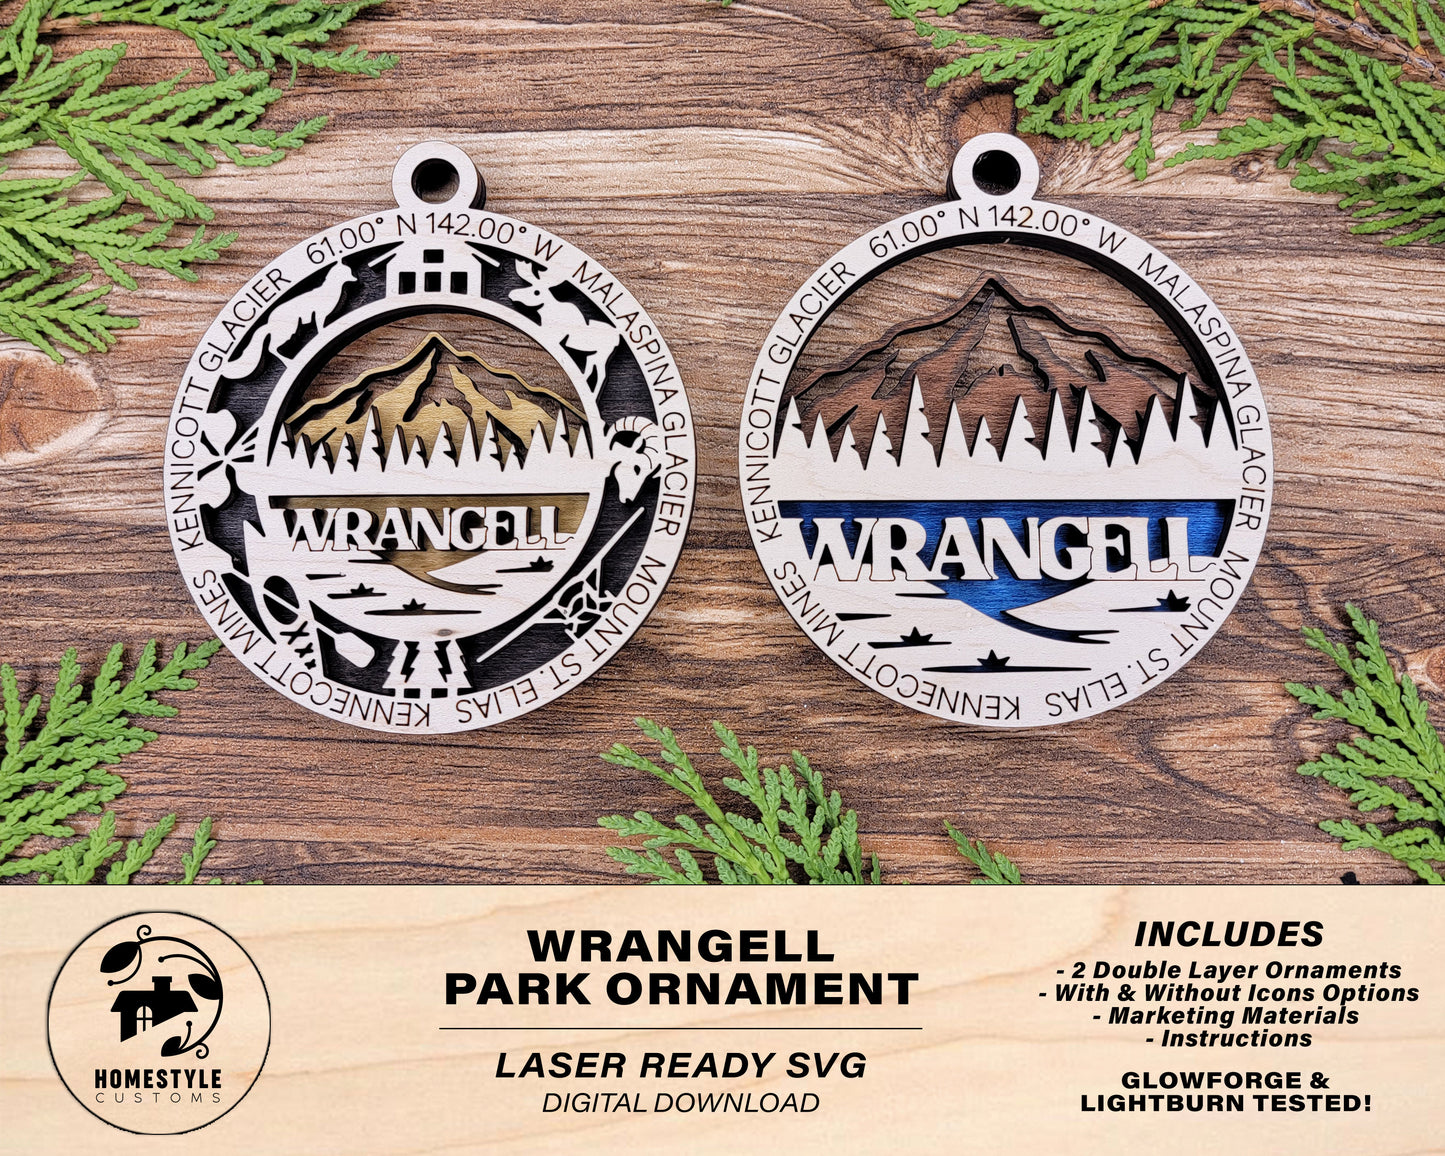 Wrangell Park Ornament - Includes 2 Ornaments - Laser Design SVG, PDF, AI File Download - Tested On Glowforge and LightBurn